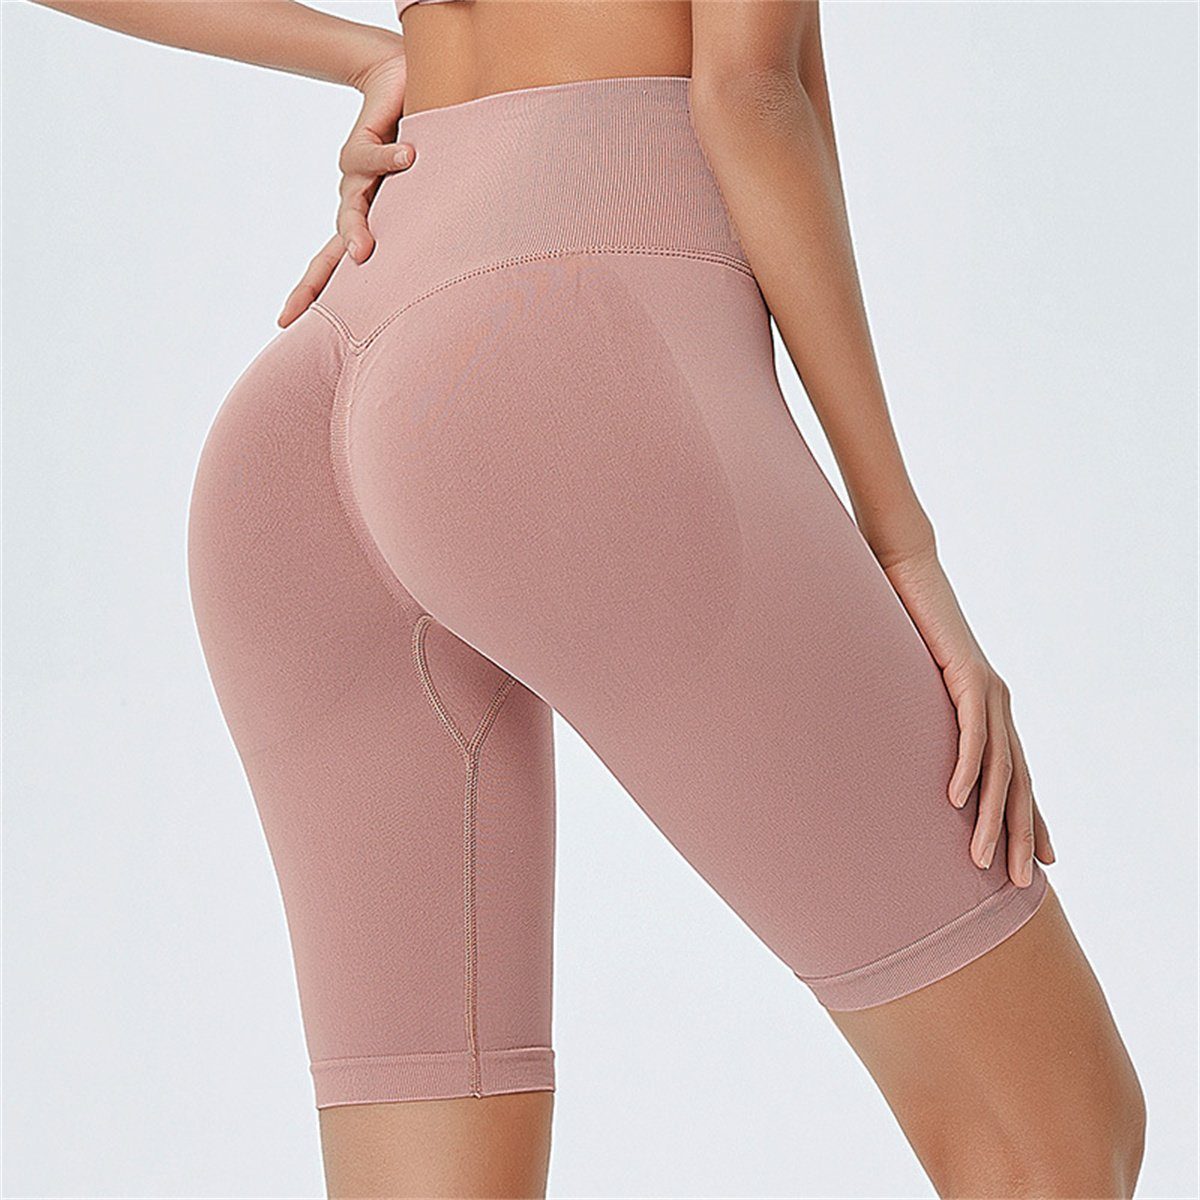 carefully selected Yogatights Damen-Fitness-Po-Lifting-Yoga-Shorts mit hoher Taille hellrosa